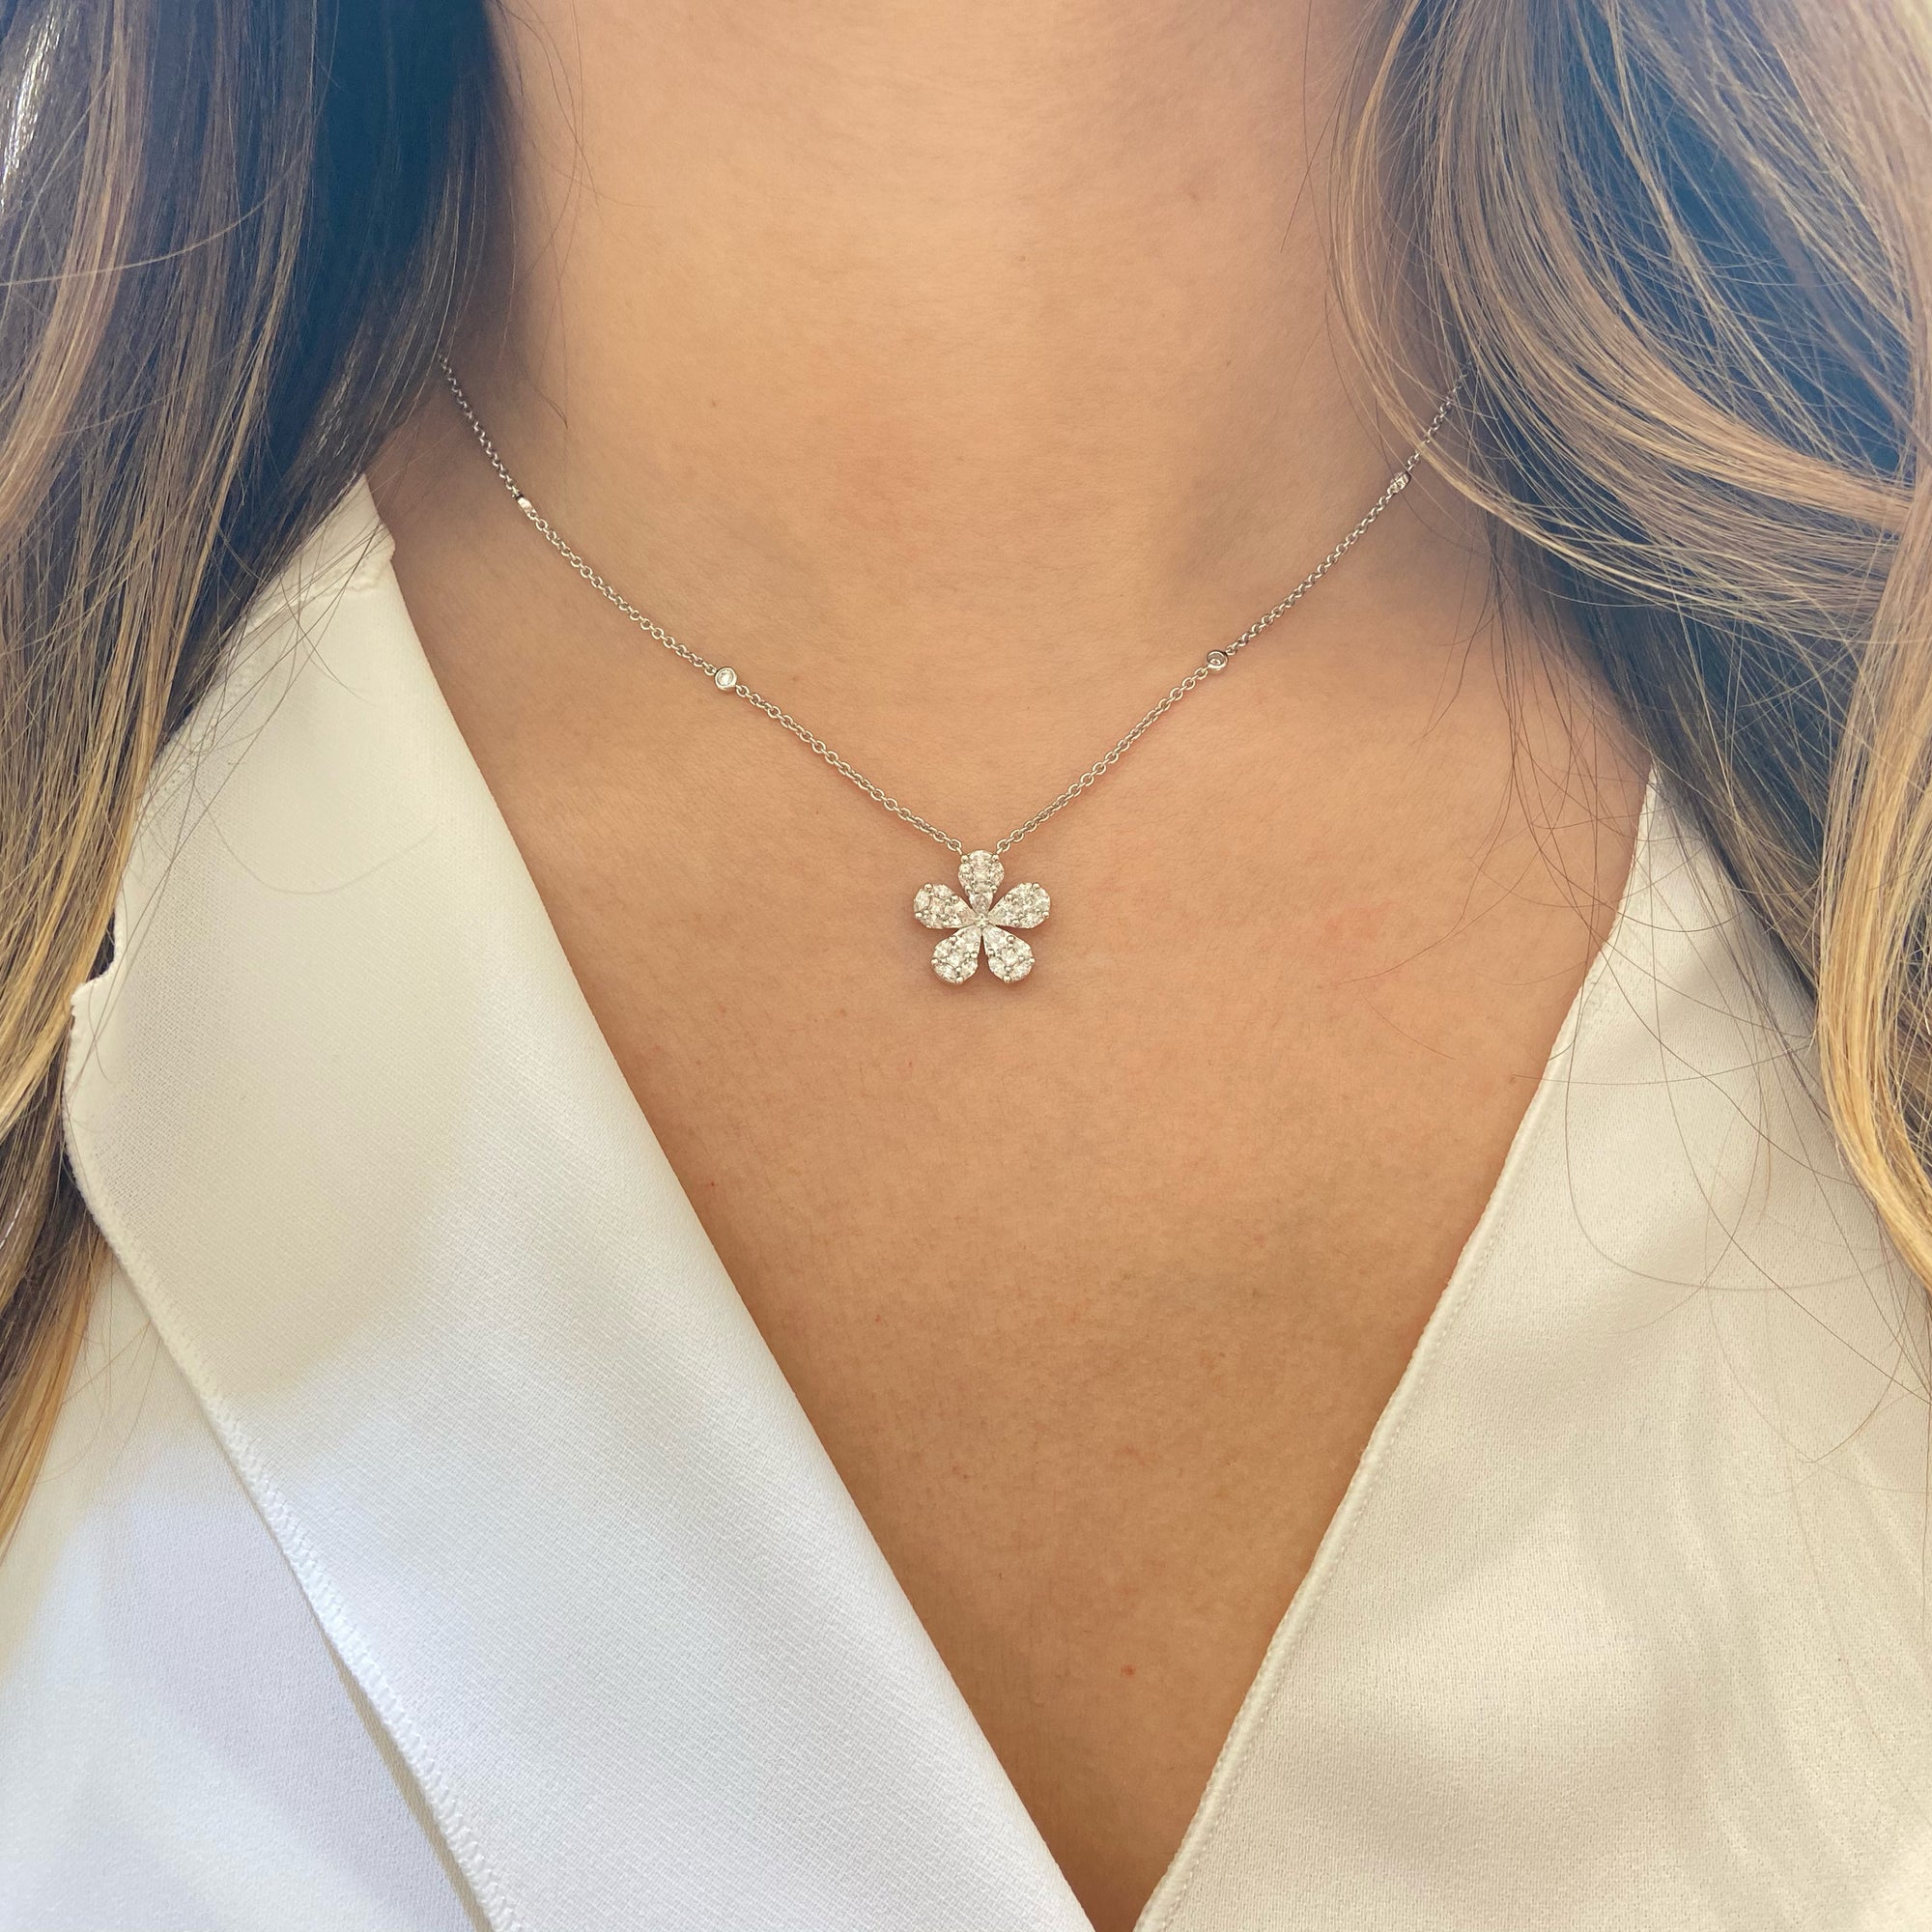 Diamond Daisy Pendant Necklace  Available in yellow, white, & rose gold.  Please allow 4-6 weeks for delivery if item is not in stock.